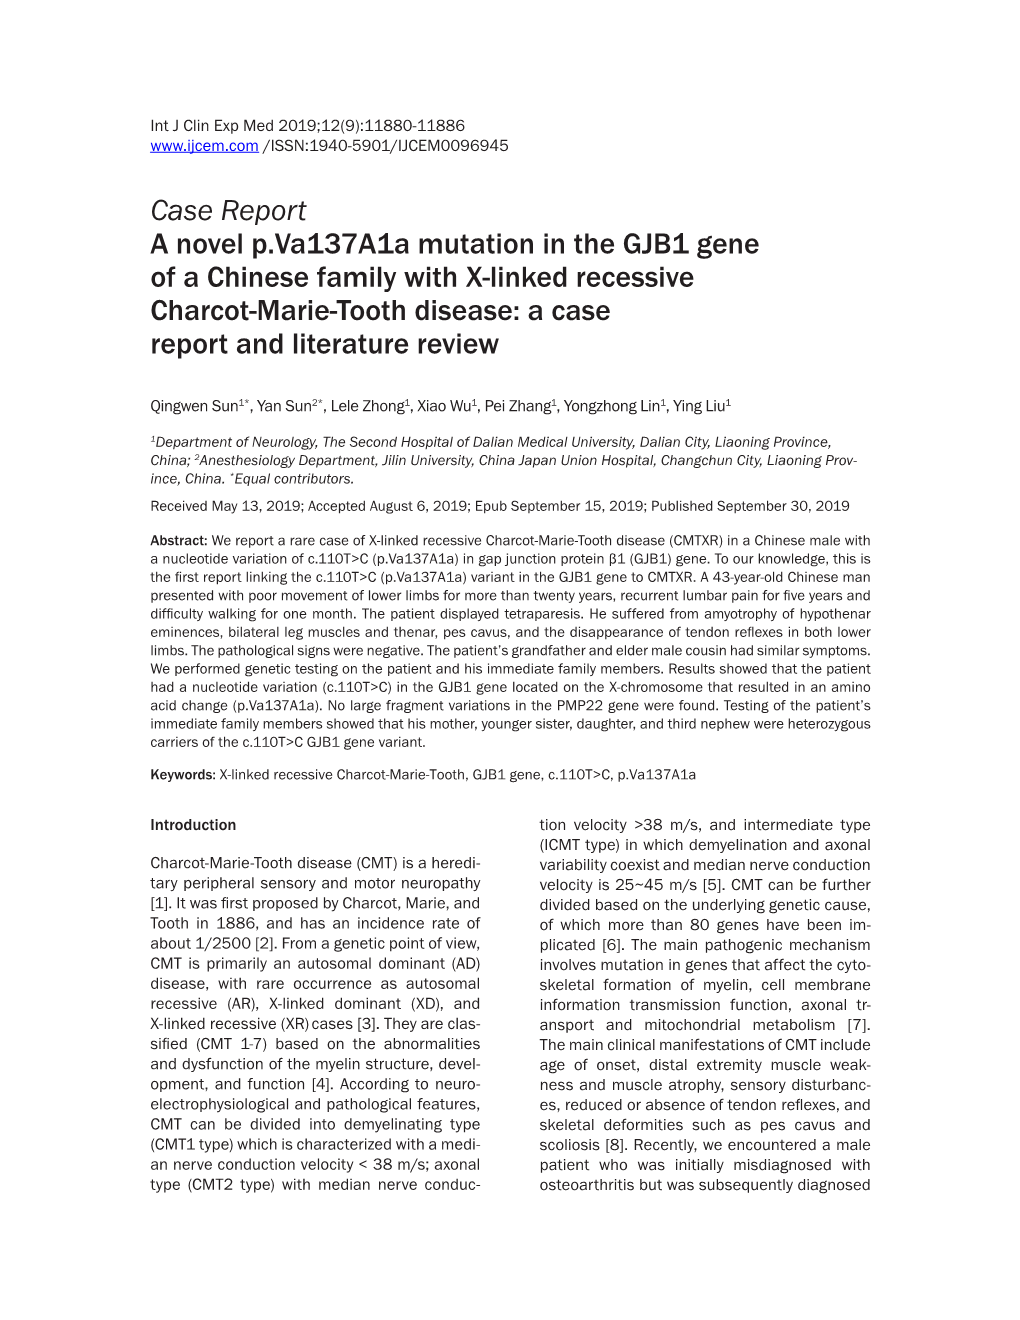 Case Report a Novel P.Va137a1a Mutation in the GJB1 Gene of a Chinese Family with X-Linked Recessive Charcot-Marie-Tooth Disease: a Case Report and Literature Review